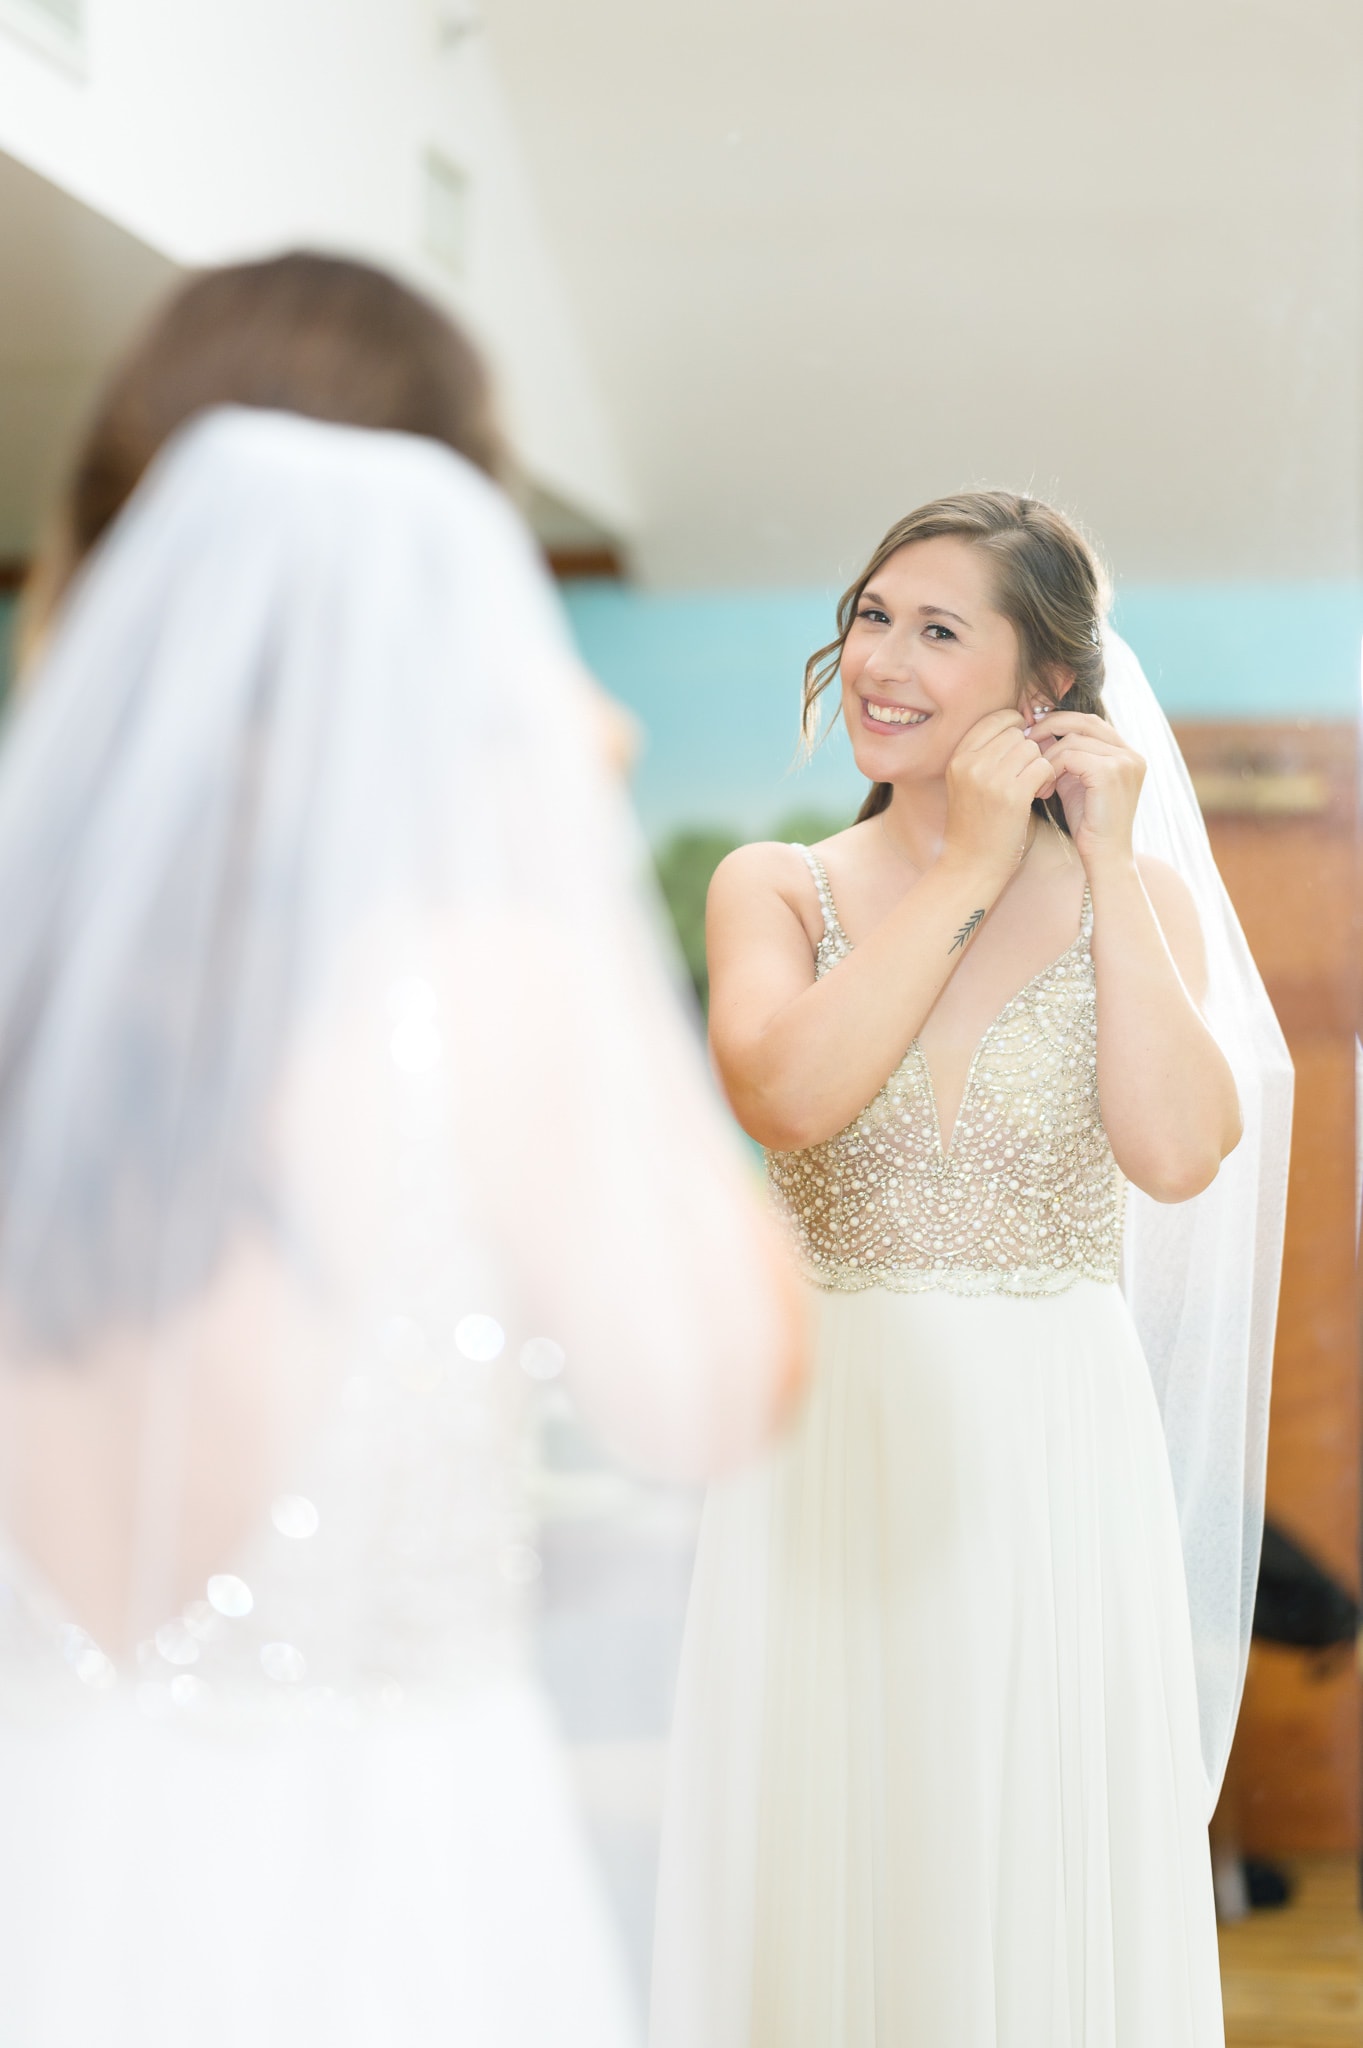 Bride putting earrings on in the mirror - Caledonia Golf & Fish Club